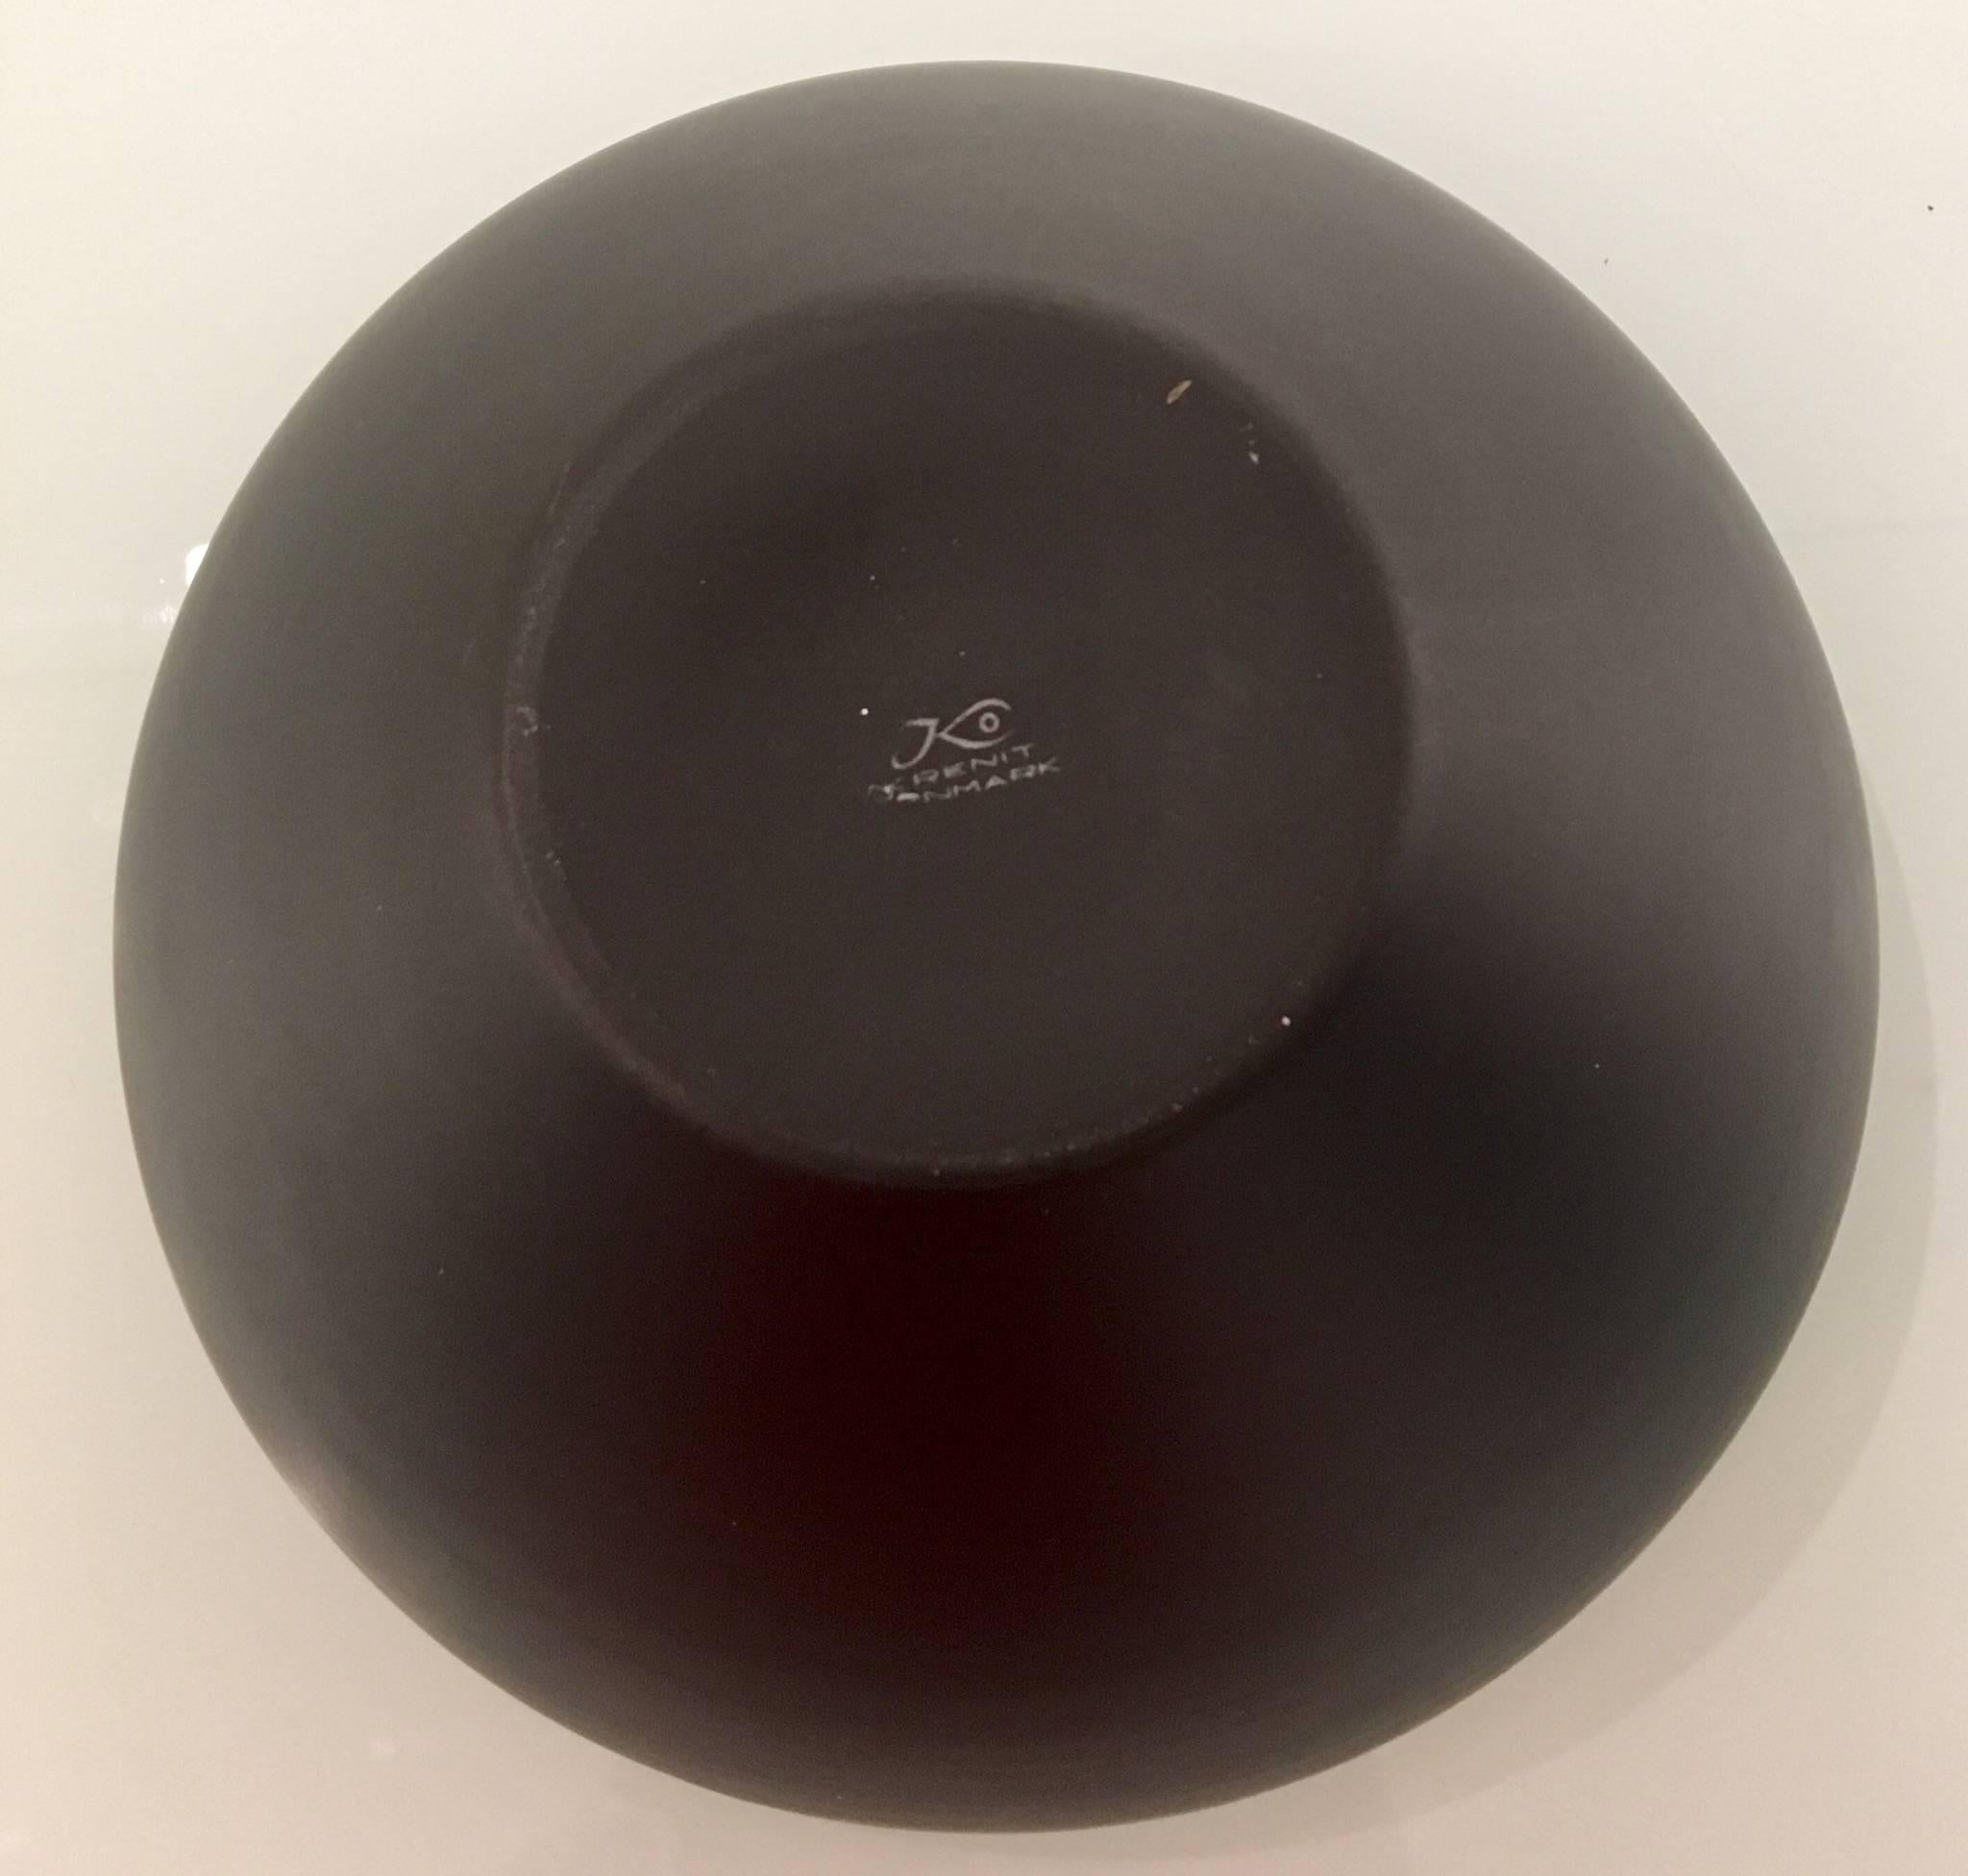 Elegant Krenit bowl circa 1950s, in black and white early marking made in Denmark light chips around the edge as shown. Perfect for a salad bowl or fruit bowl.